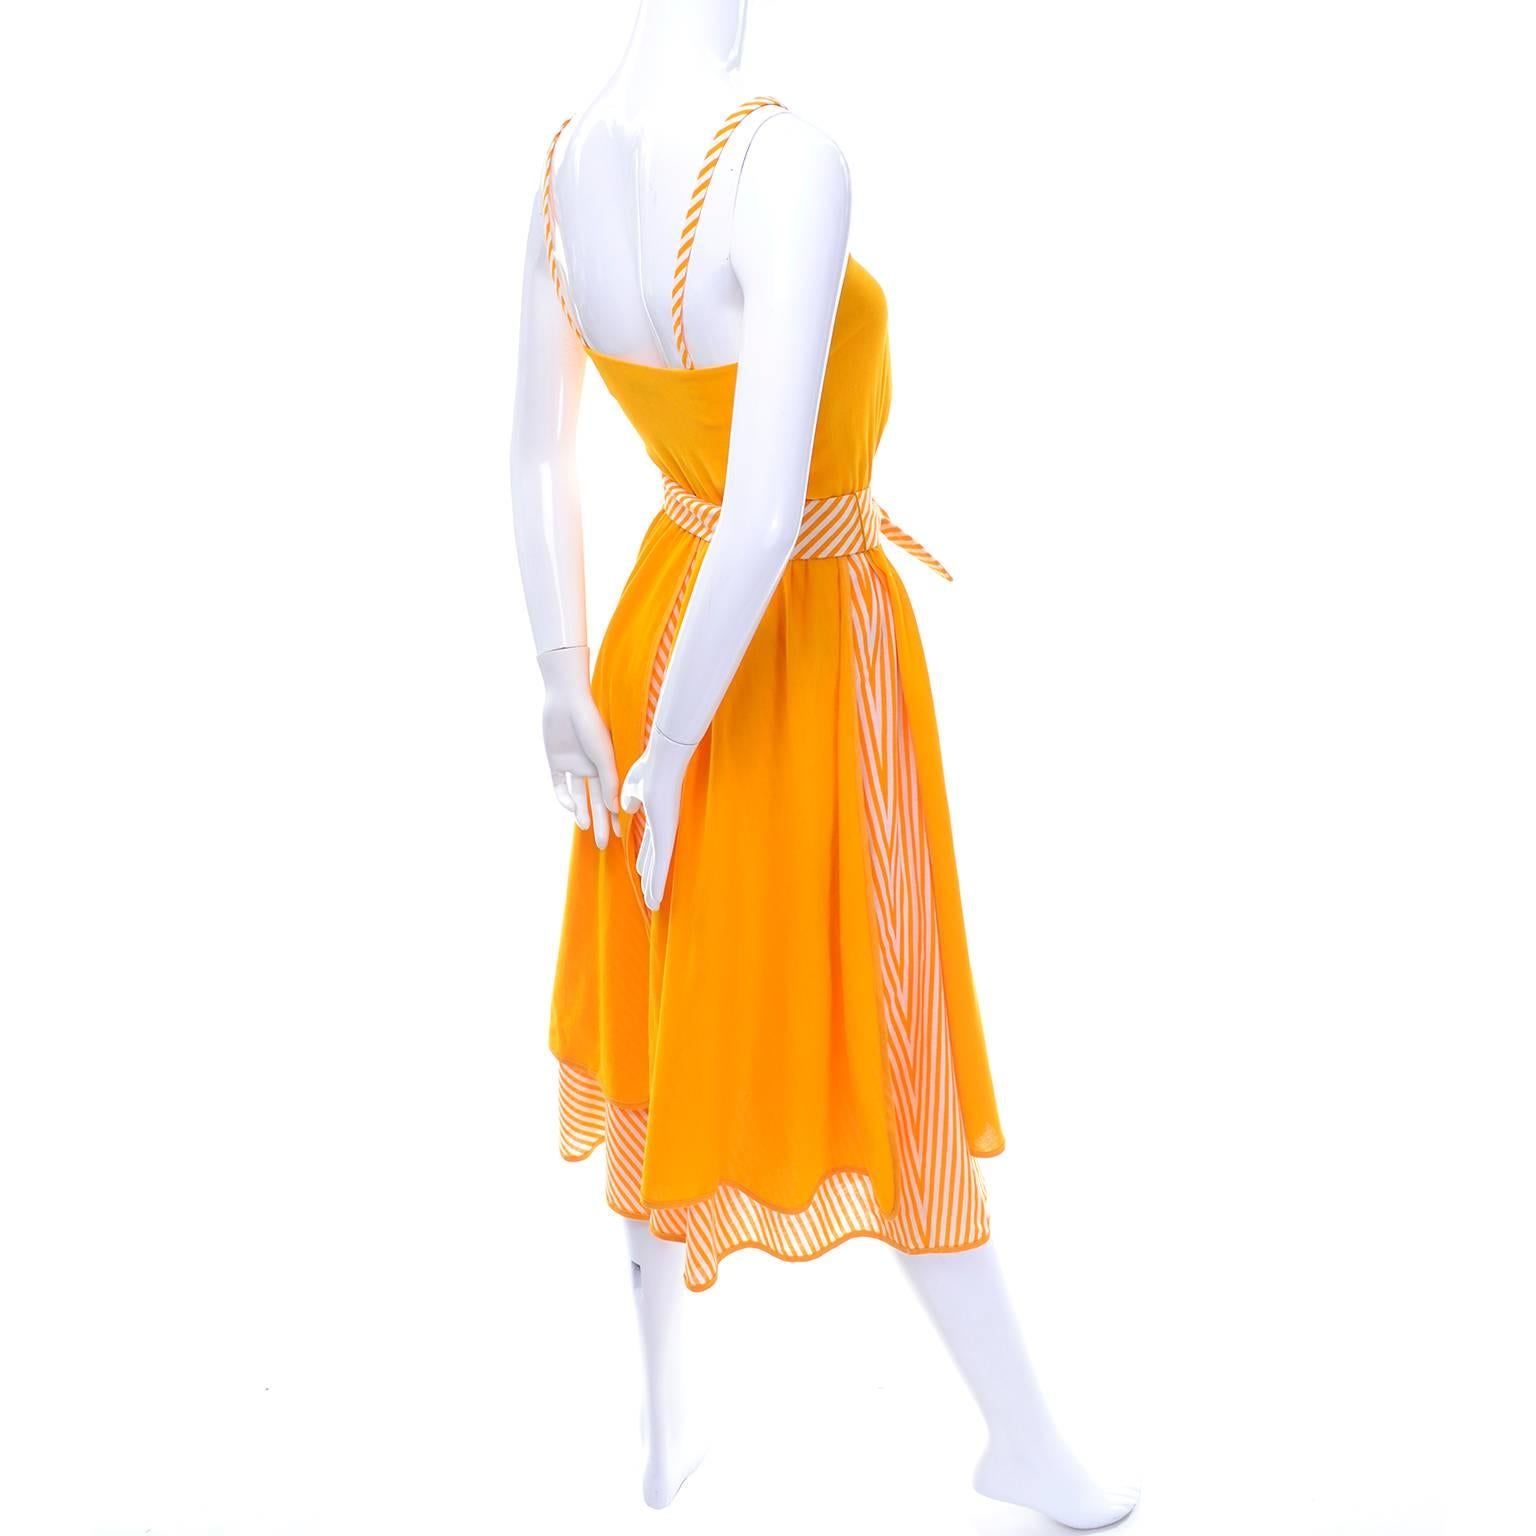 Lanvin Dress Deadstock 1970s Marigold Yellow Striped Vintage Sundress w Tags In New Condition For Sale In Portland, OR